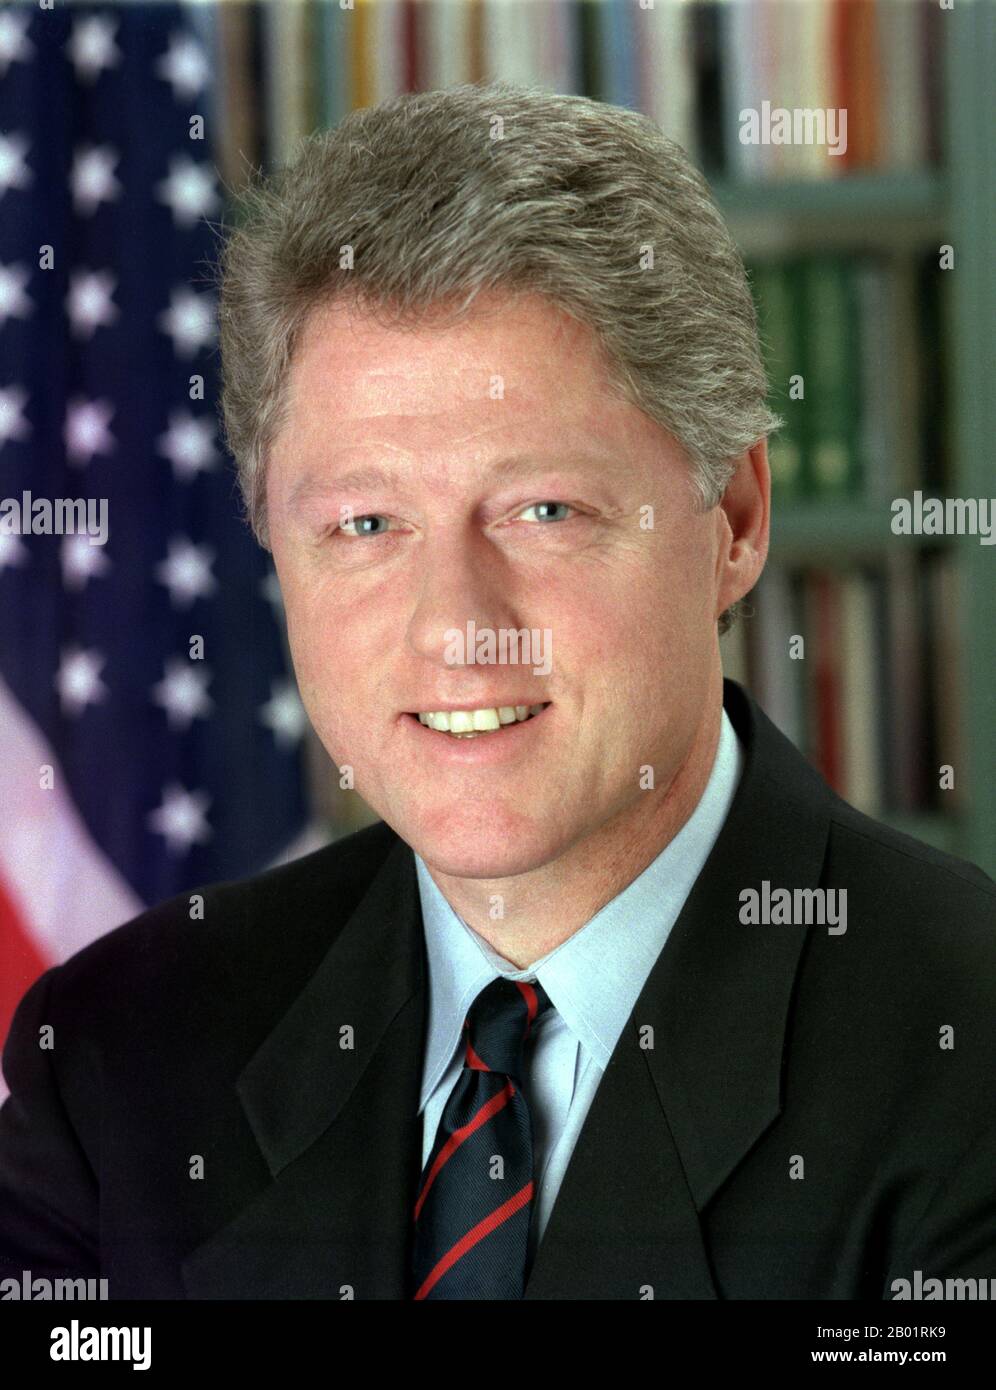 USA: William 'Bill' Clinton (19 August 1946 -), 42nd President of the United States (r. 1993-2001). Official portrait by Bob McNeely, 1 January 1993.  William Jefferson  Clinton (born William Jefferson Blythe III) is an American politician who served as the 42nd President of the United States from 1993 to 2001. Inaugurated at age 46, he was the third-youngest president. He took office at the end of the Cold War, and was the first president of the baby boomer generation. Clinton has been described as a New Democrat. Many of his policies have been attributed to a centrist Third Way philosophy. Stock Photo